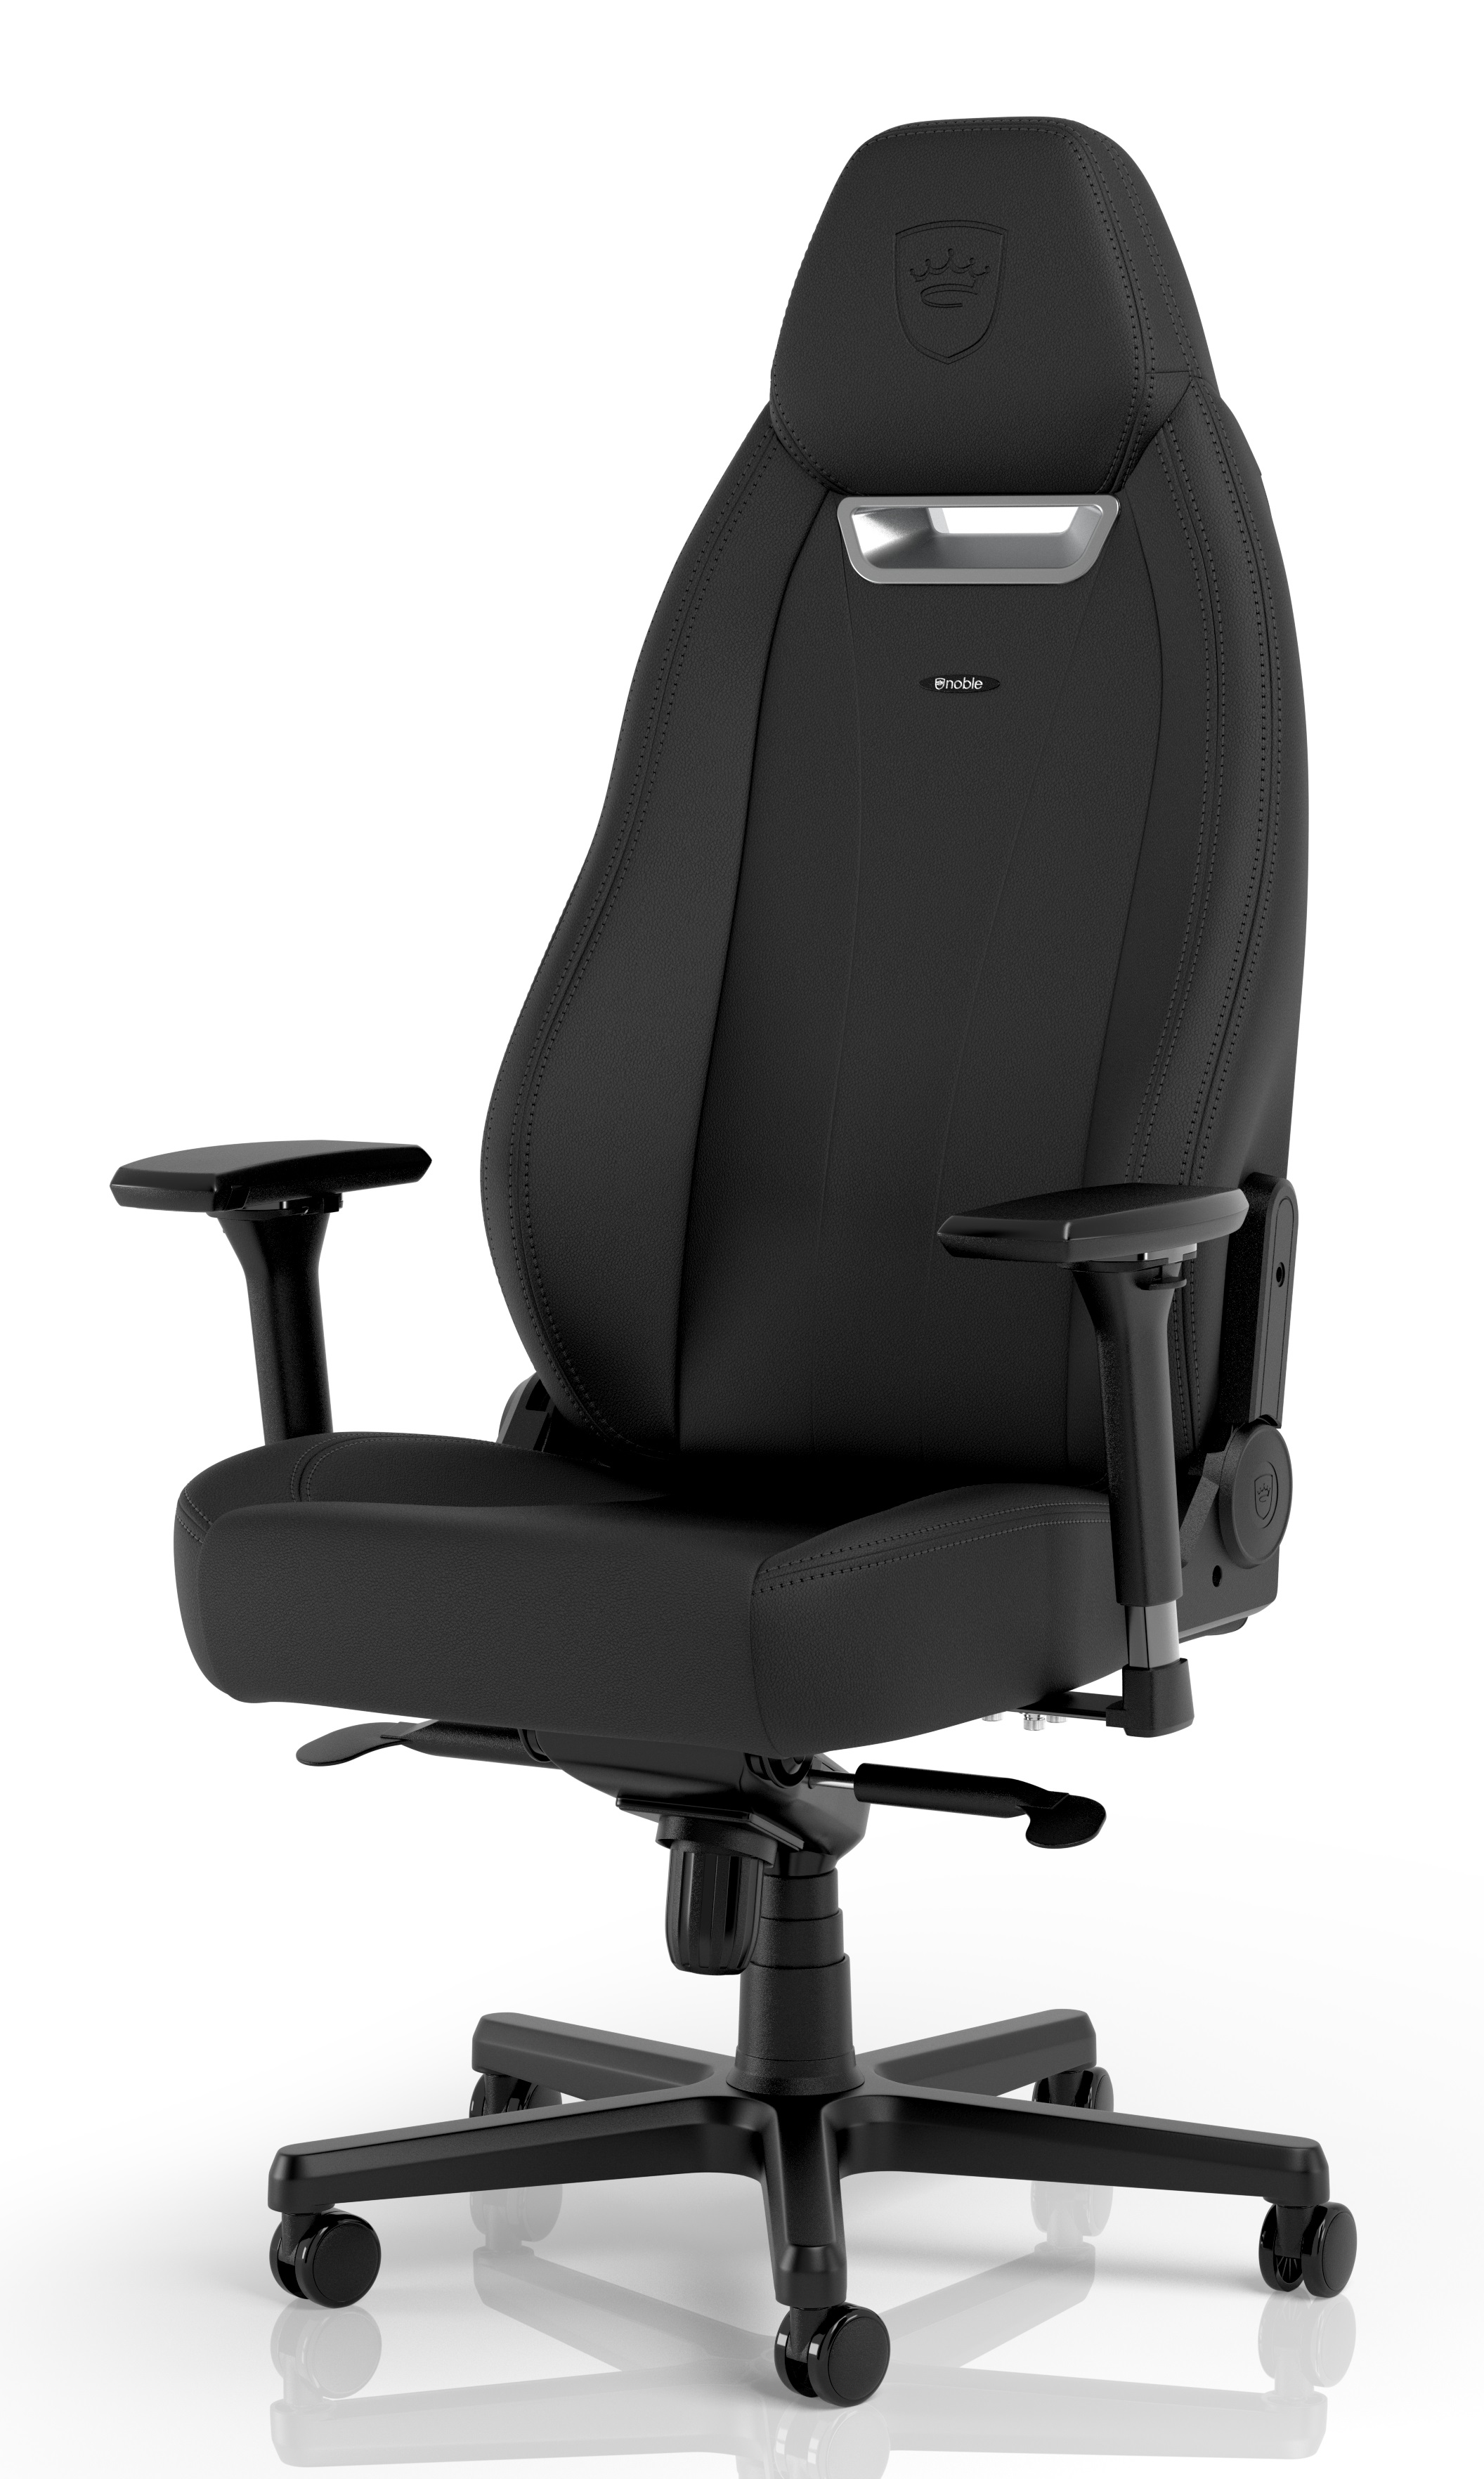 noblechairs LEGEND Gaming Chair Black Edition – High-tech PU Leather